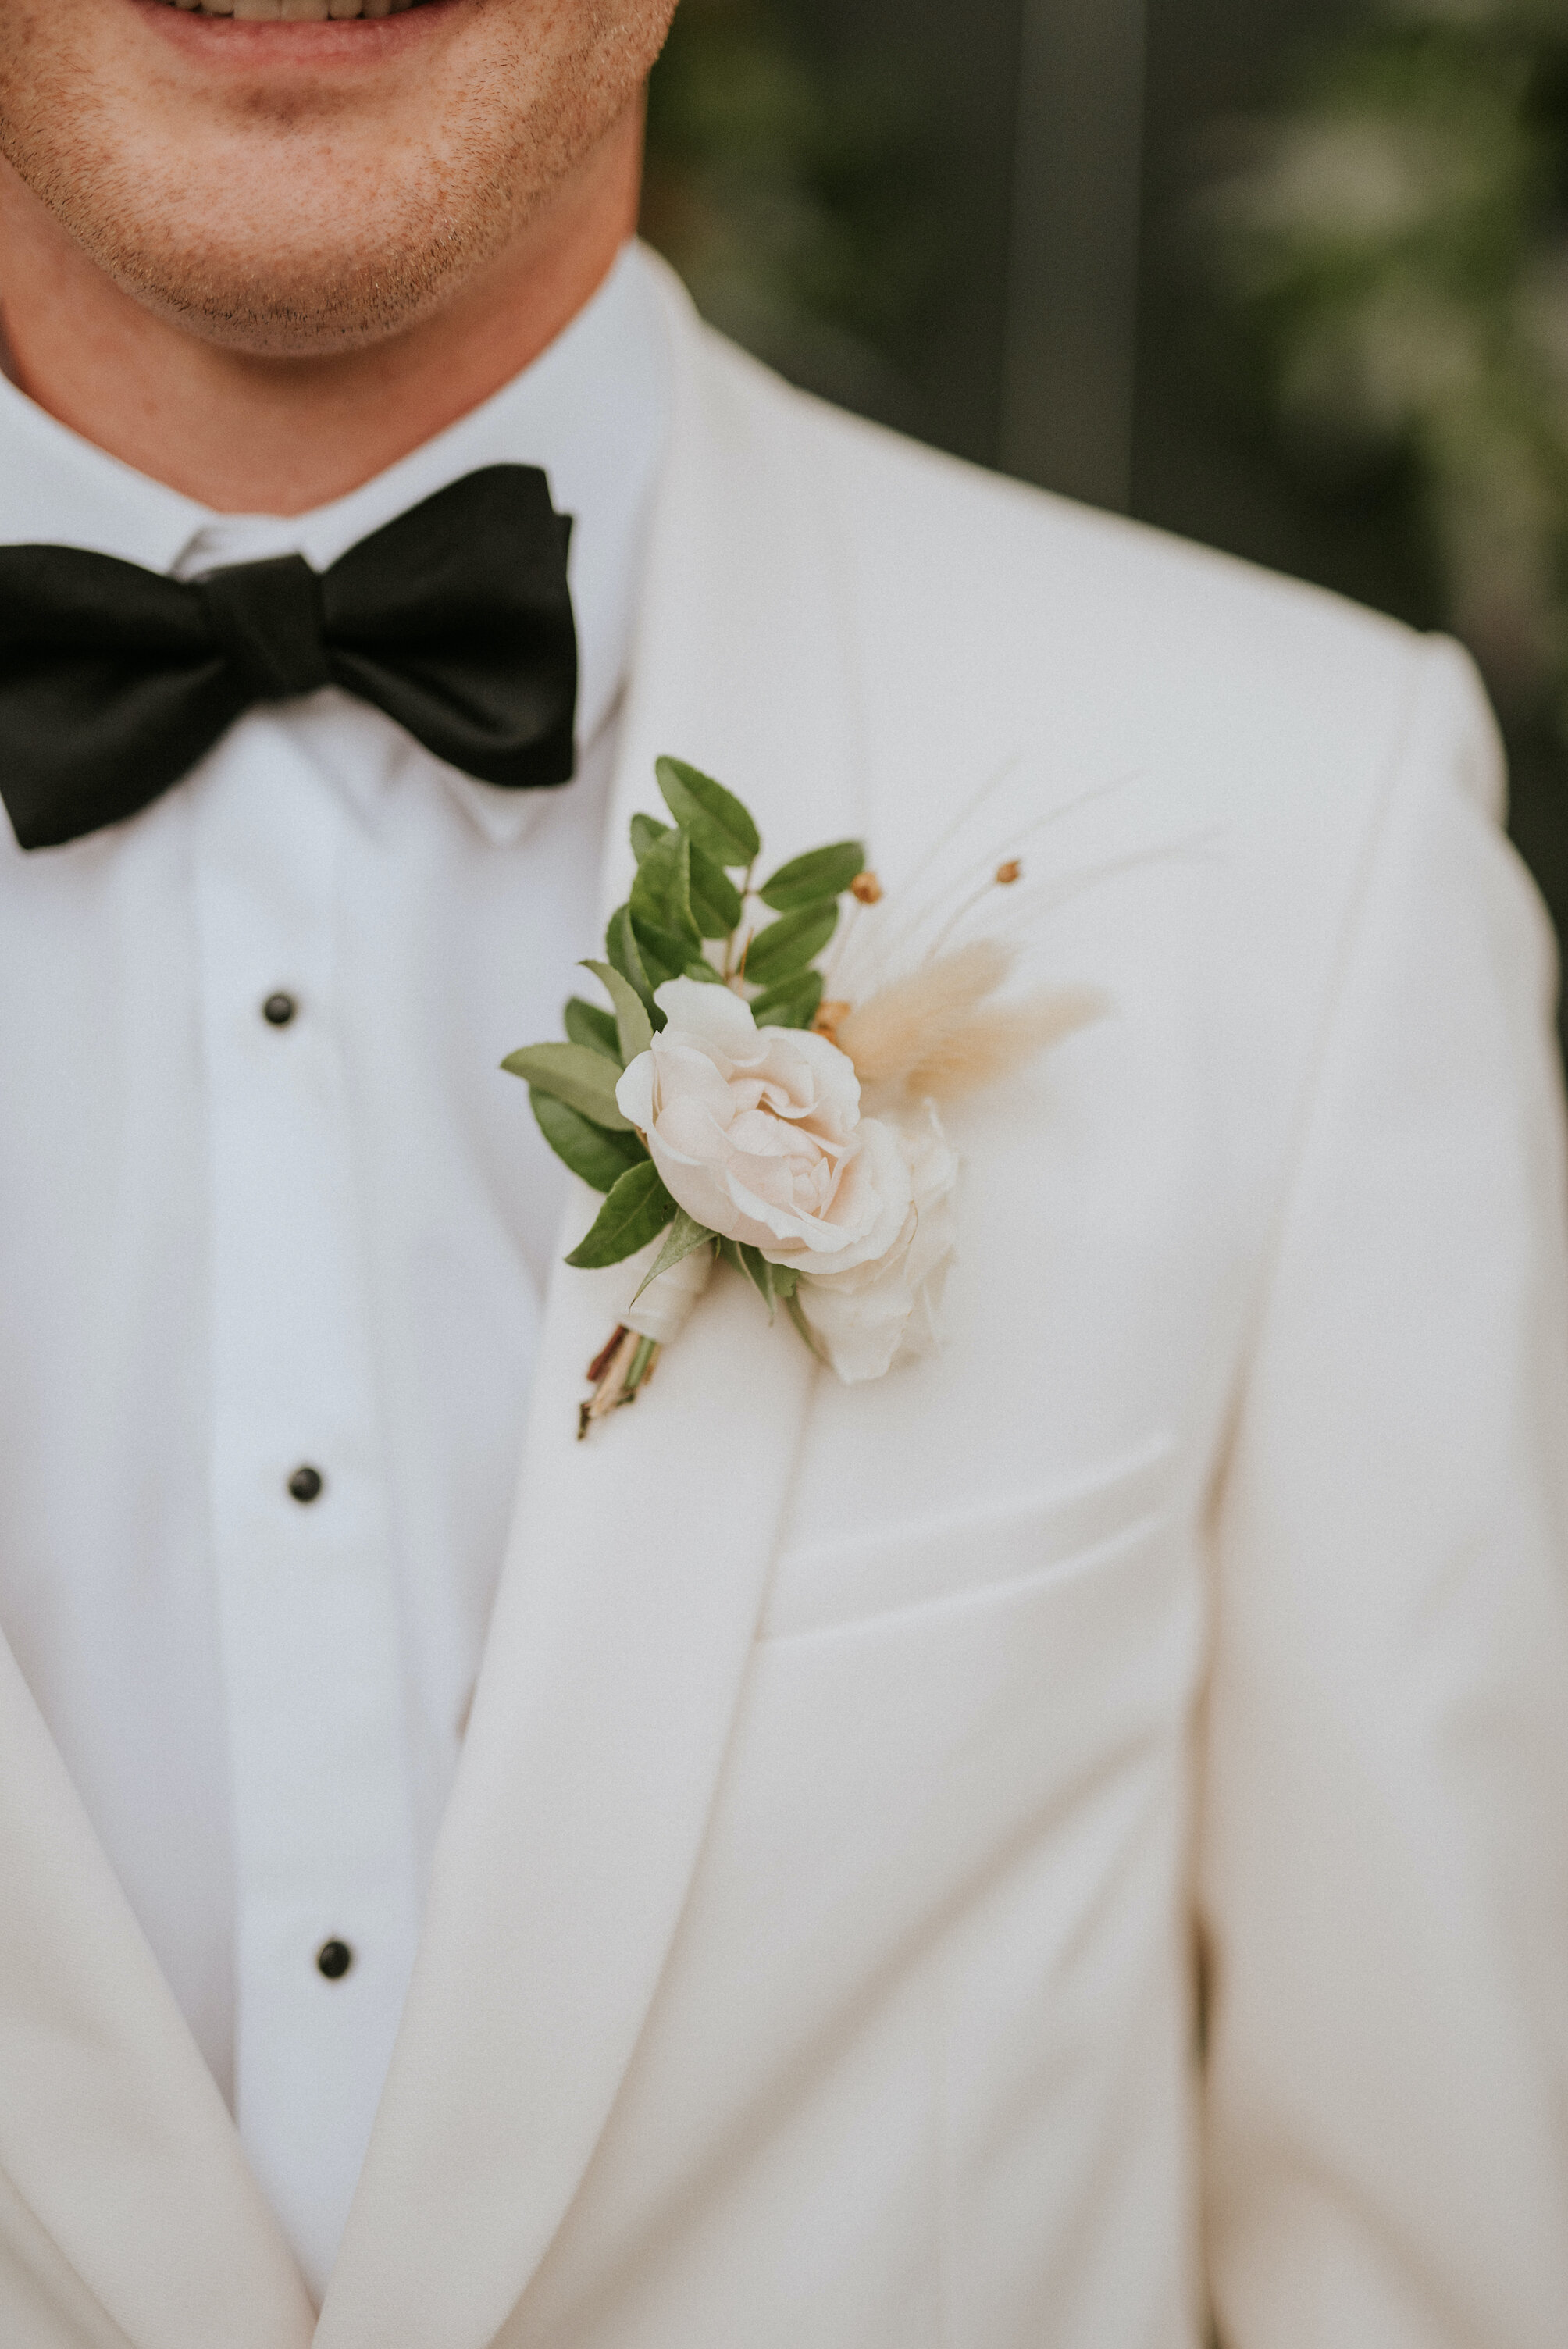 Delicate, boho boutonnière of huckleberry, majolica spray roses, and pampas grass. Designed by Nashville wedding floral designer, Rosemary & Finch at Cheekwood Botanical Gardens